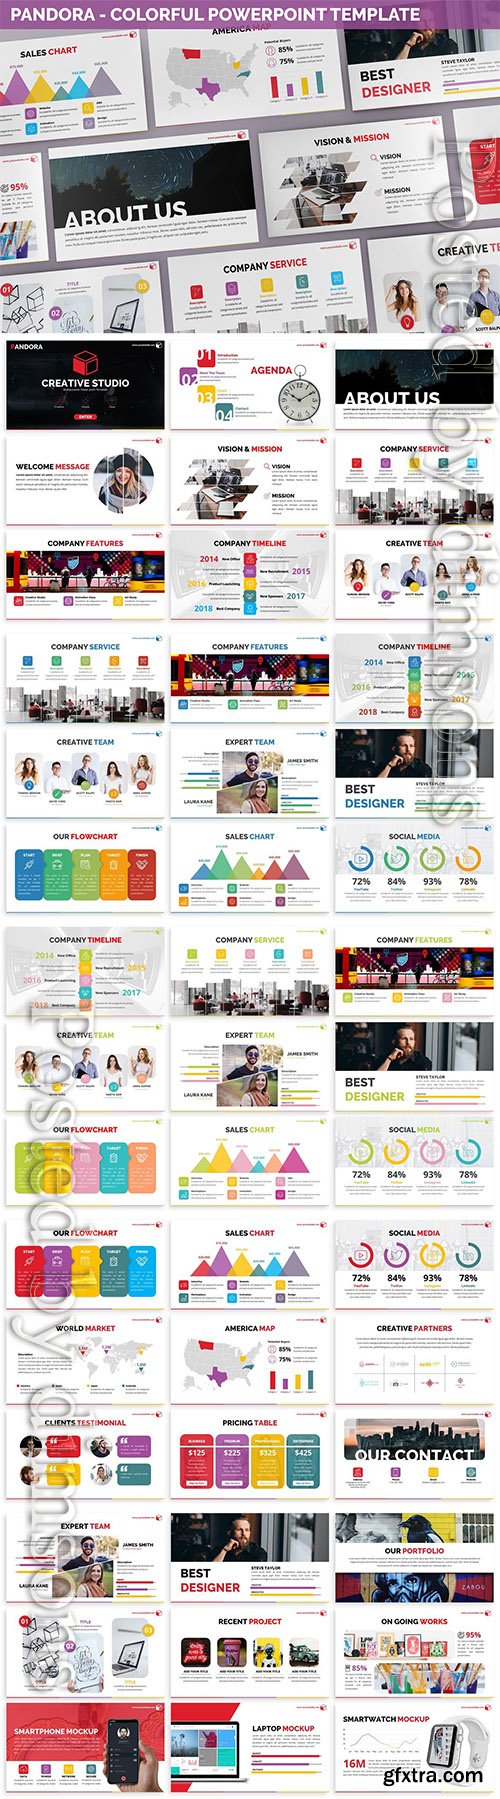 Pandora - Colorful Powerpoint Template